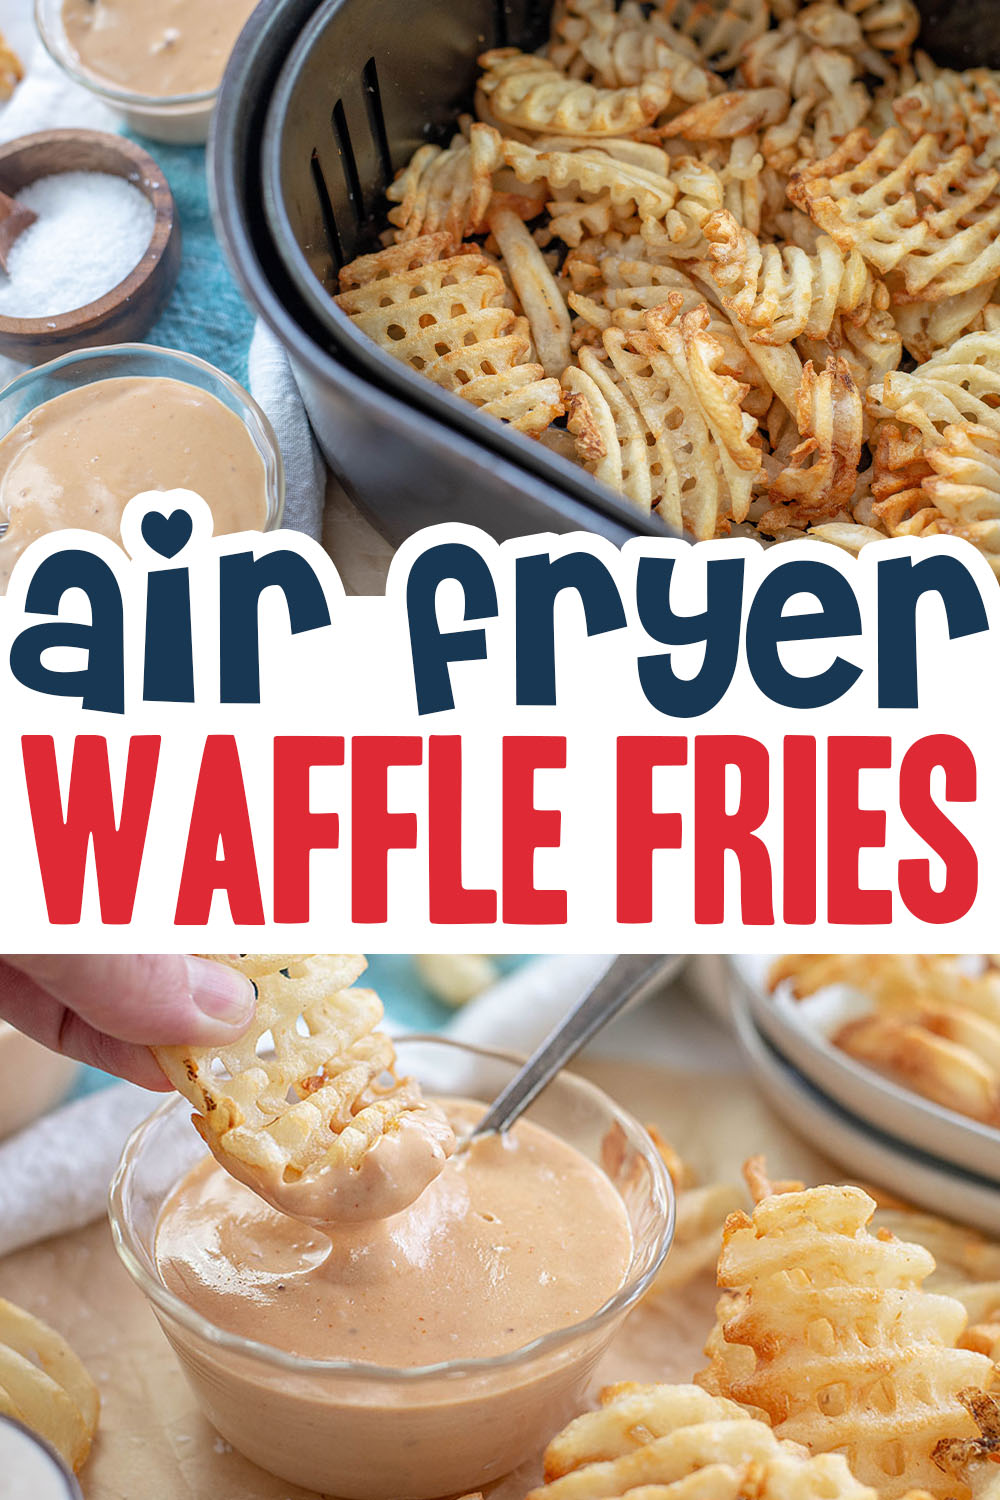 If you are a fan of waffle fries don't be afraid to try cooking them in your air fryer!  The results are great!